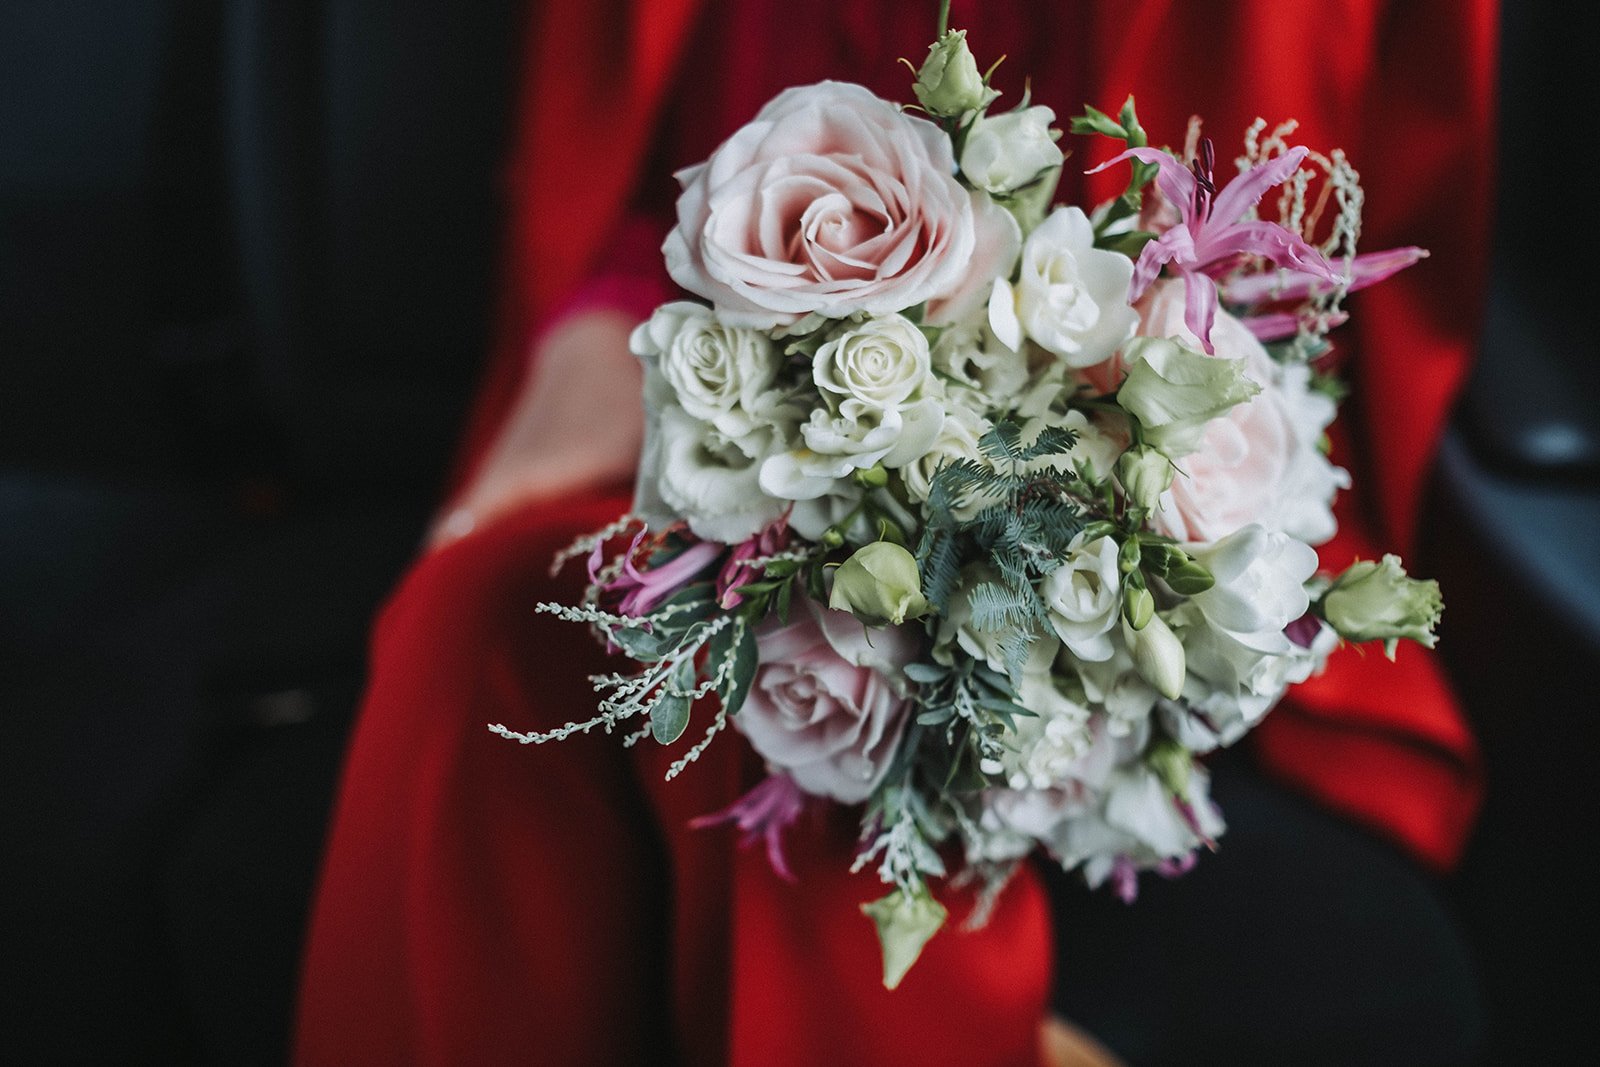  A close up image of a beautiful pink and white hand tied wedding bouquet. The red outfit of the person holding the wedding florals is blurred in the background. 